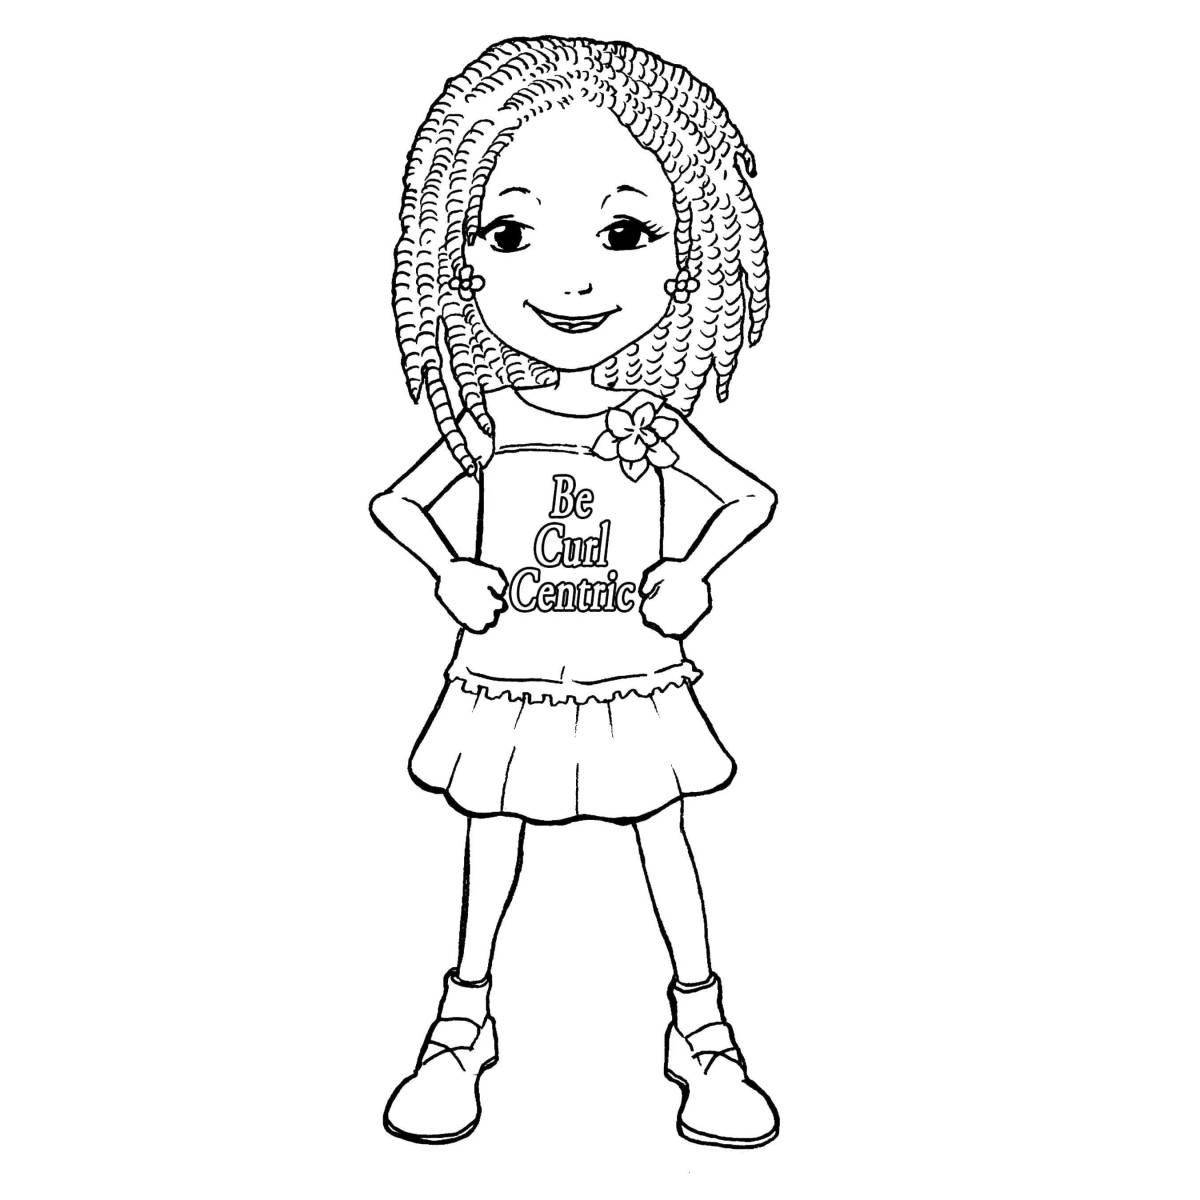 Nastic coloring page